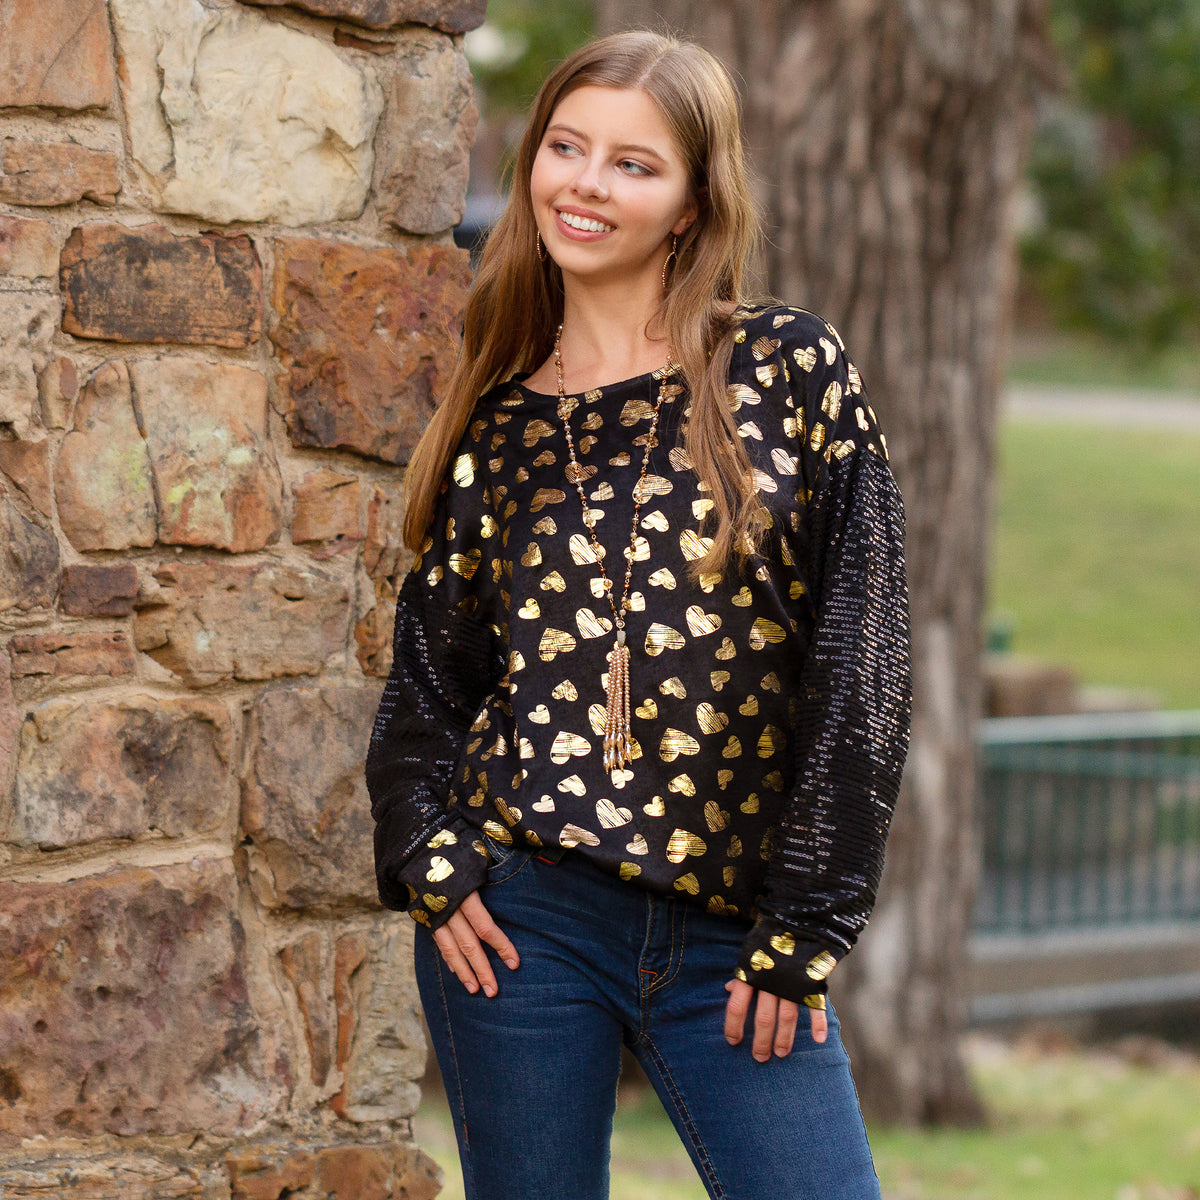 10737 - Valentines Heart Top with Sequin Sleeves